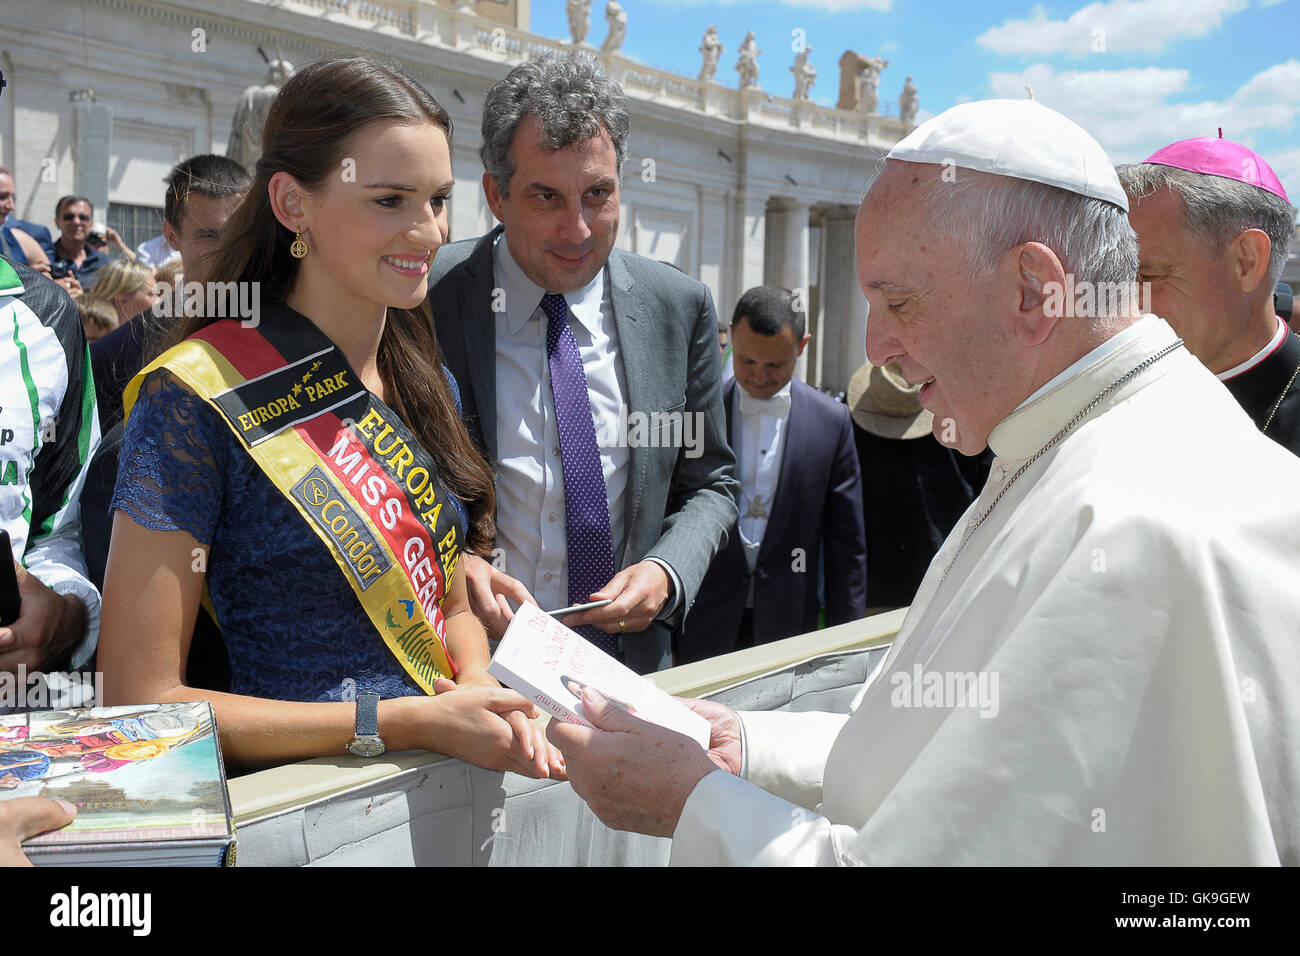 A general audience with Pope Francis in St. Peter's Square  Featuring: Pope Francis, Miss Germany 2016, Lena Broder Where: Rome, Italy When: 15 Jun 2016 Credit: IPA/WENN.com  **Only available for publication in UK, USA, Germany, Austria** Stock Photo